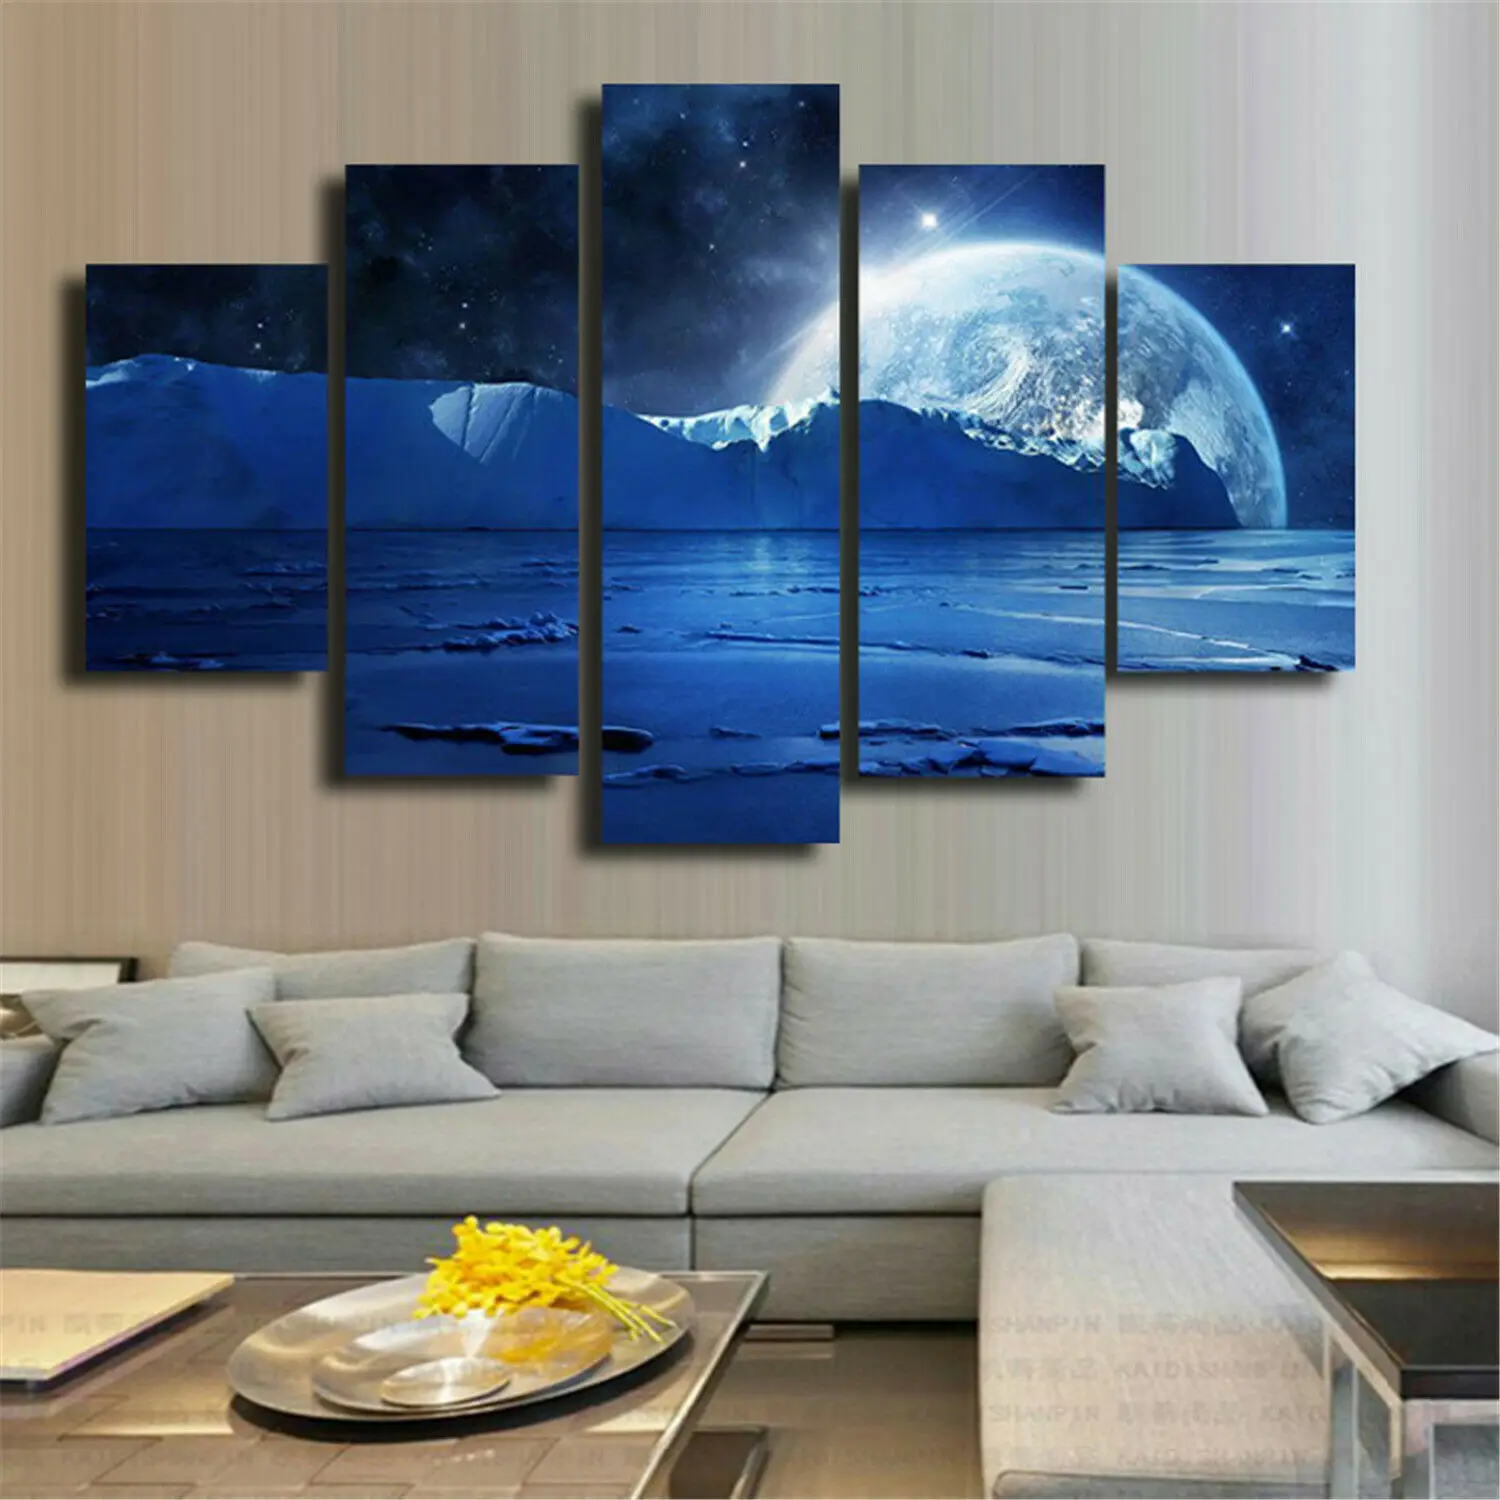 5 Panel Pictures HD Print Canvas Wall Art Poster Living Room Blue Planet Room Decor Paintings Home Decor No Framed 5 Pieces